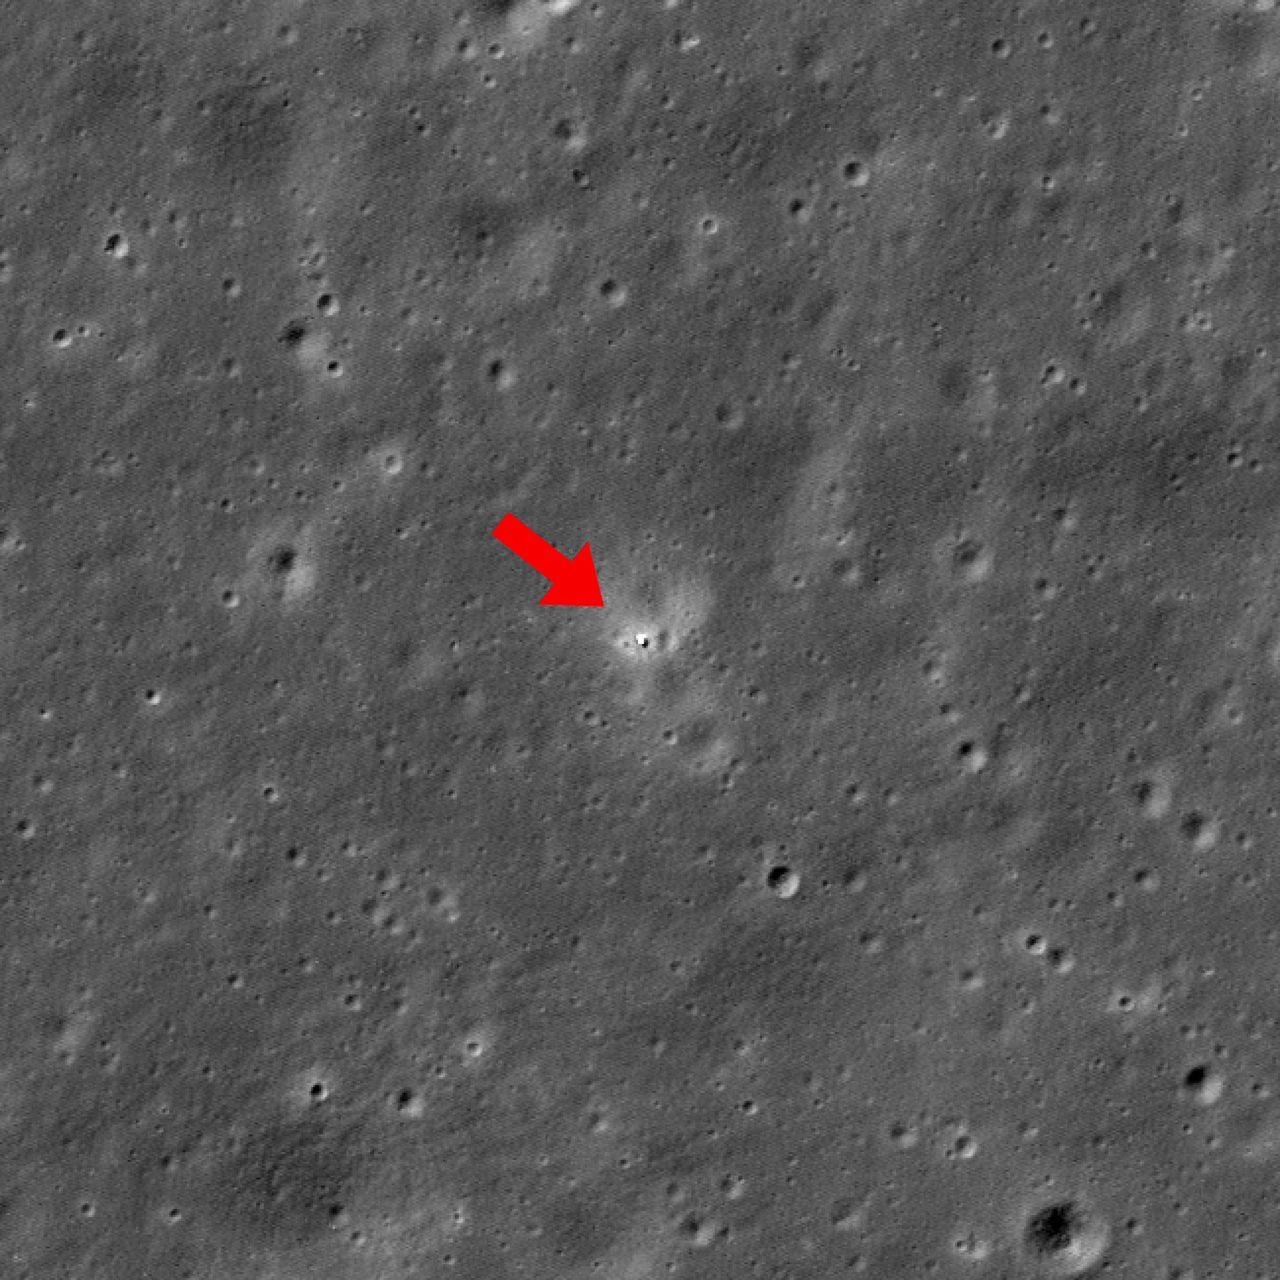 Chinese probe Chang'e 6 on the Moon